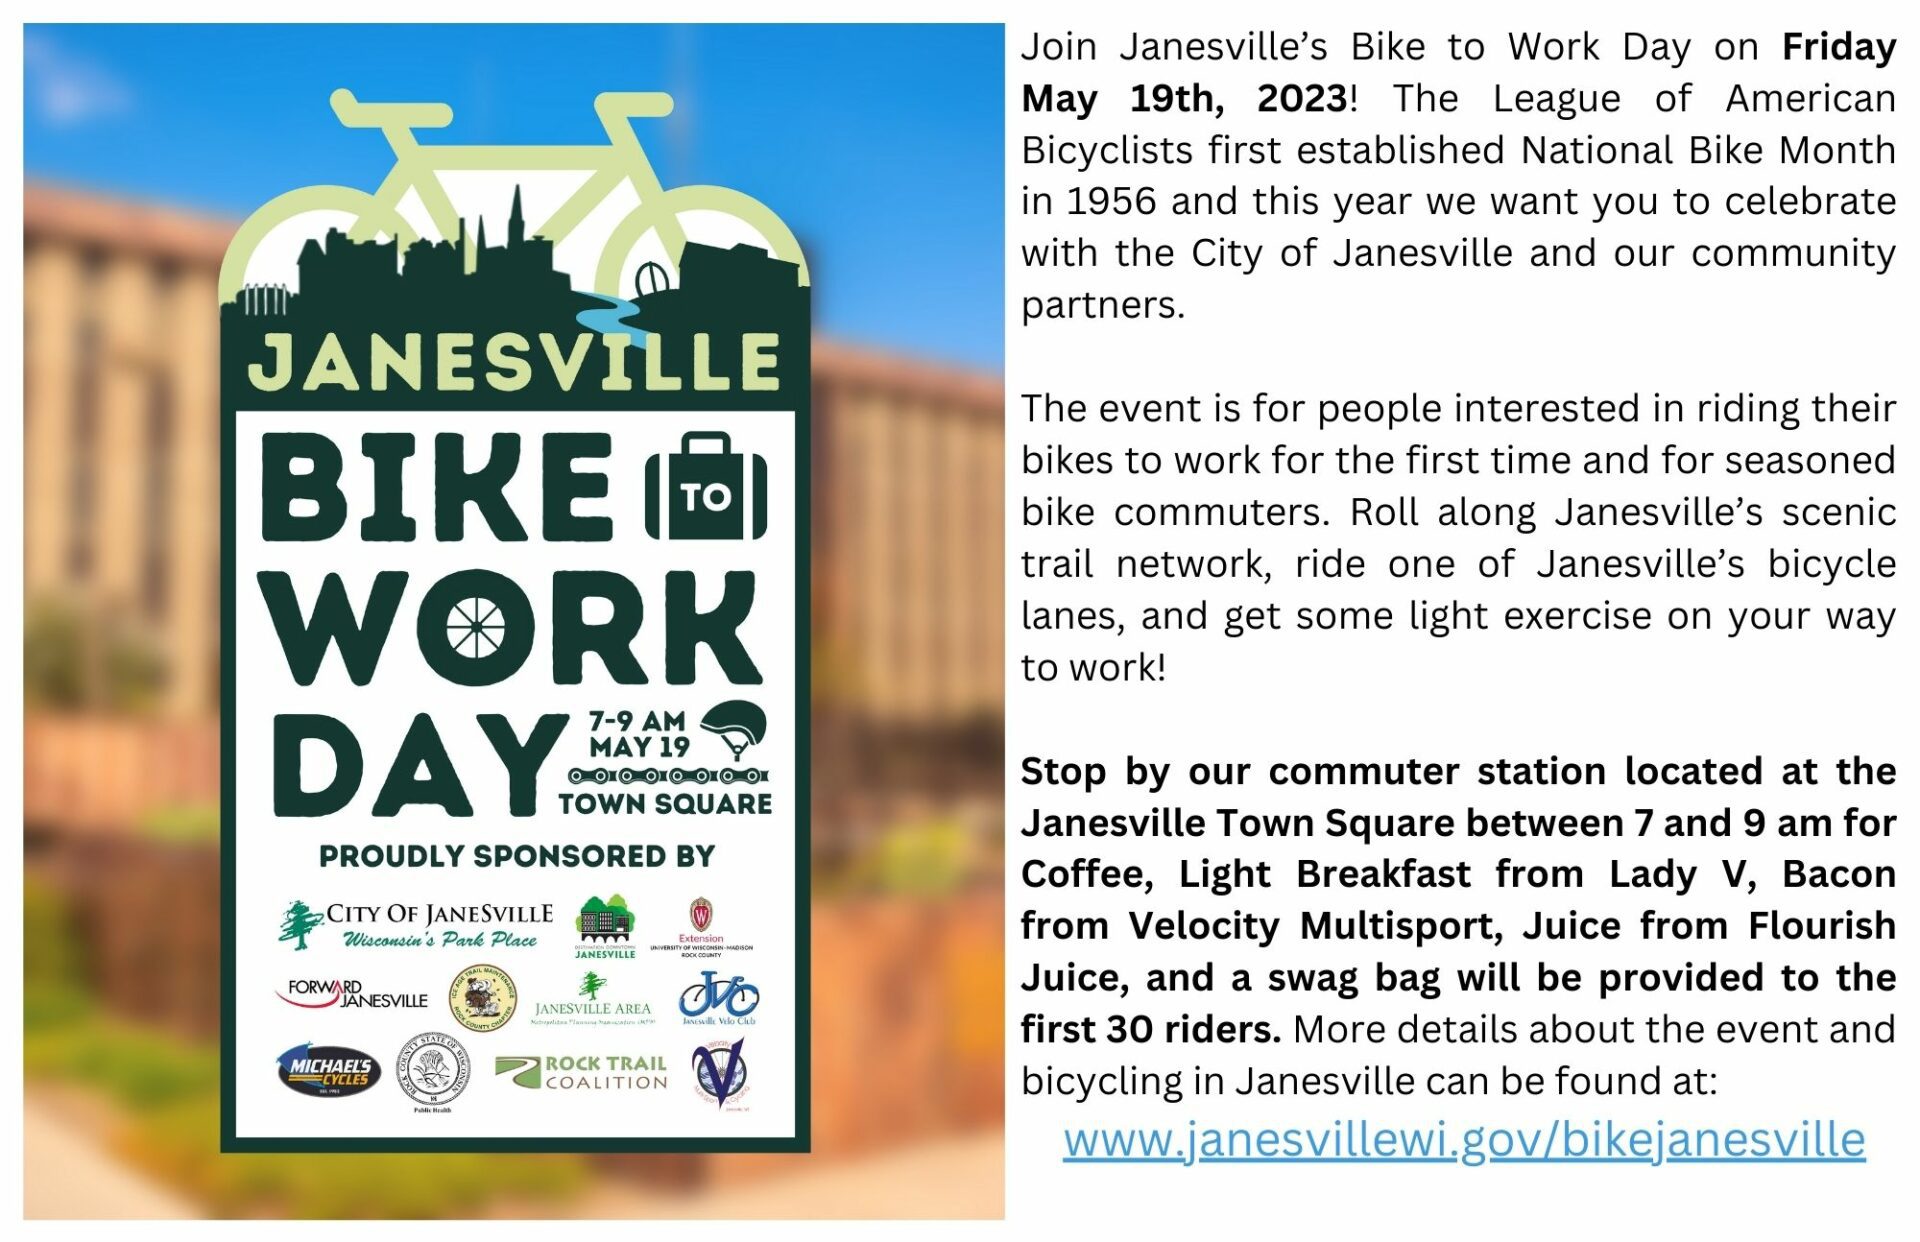 Bike to work day promotion